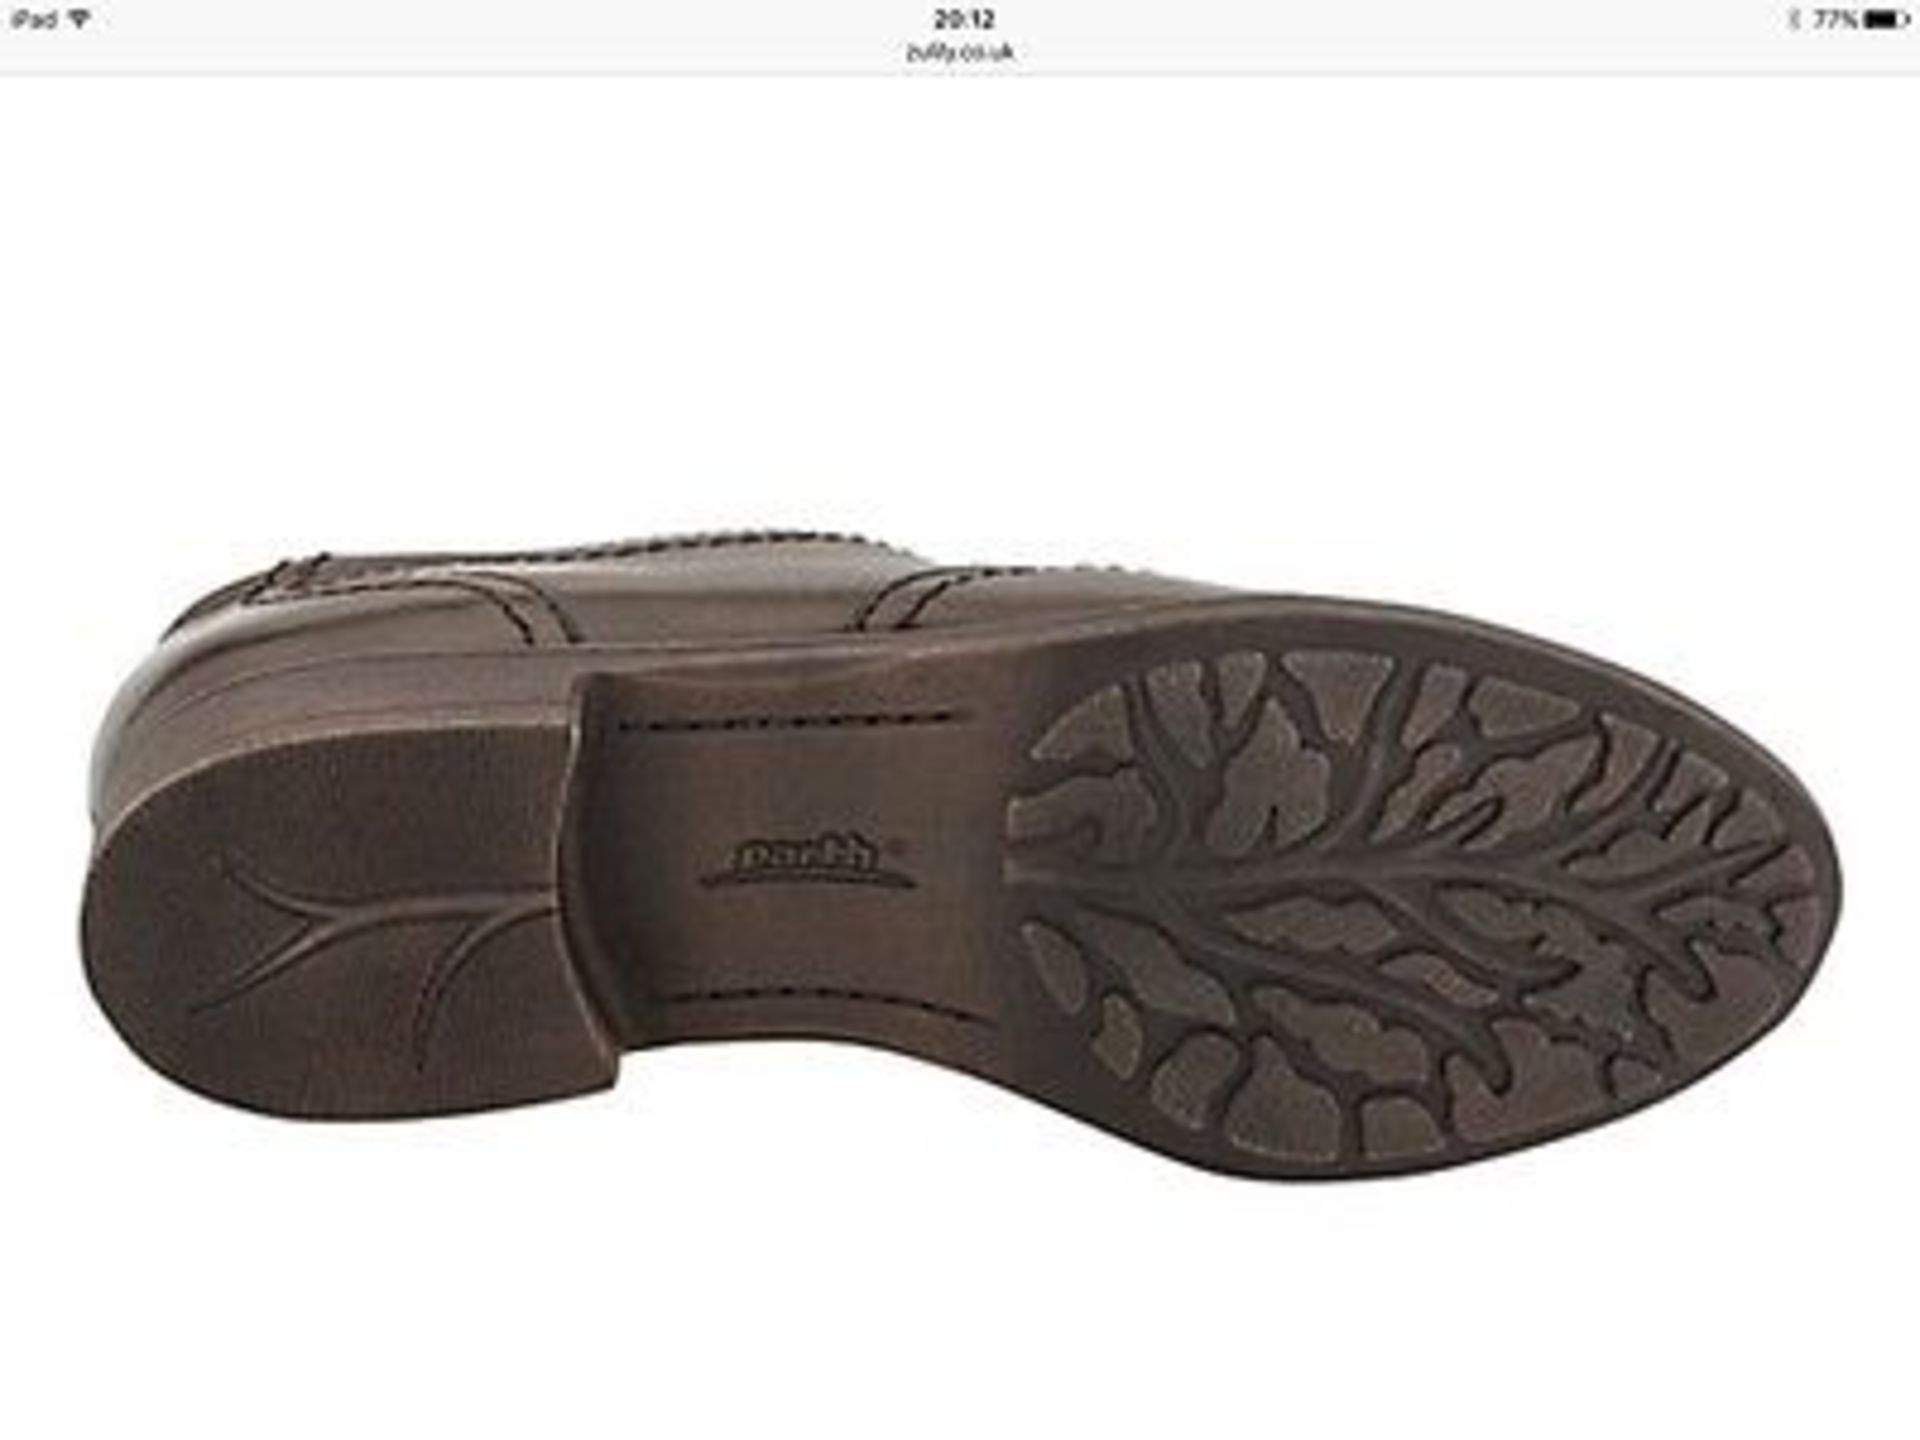 earth Stratton Bark Leather Loafer, size 7 (New with box) - Image 5 of 6